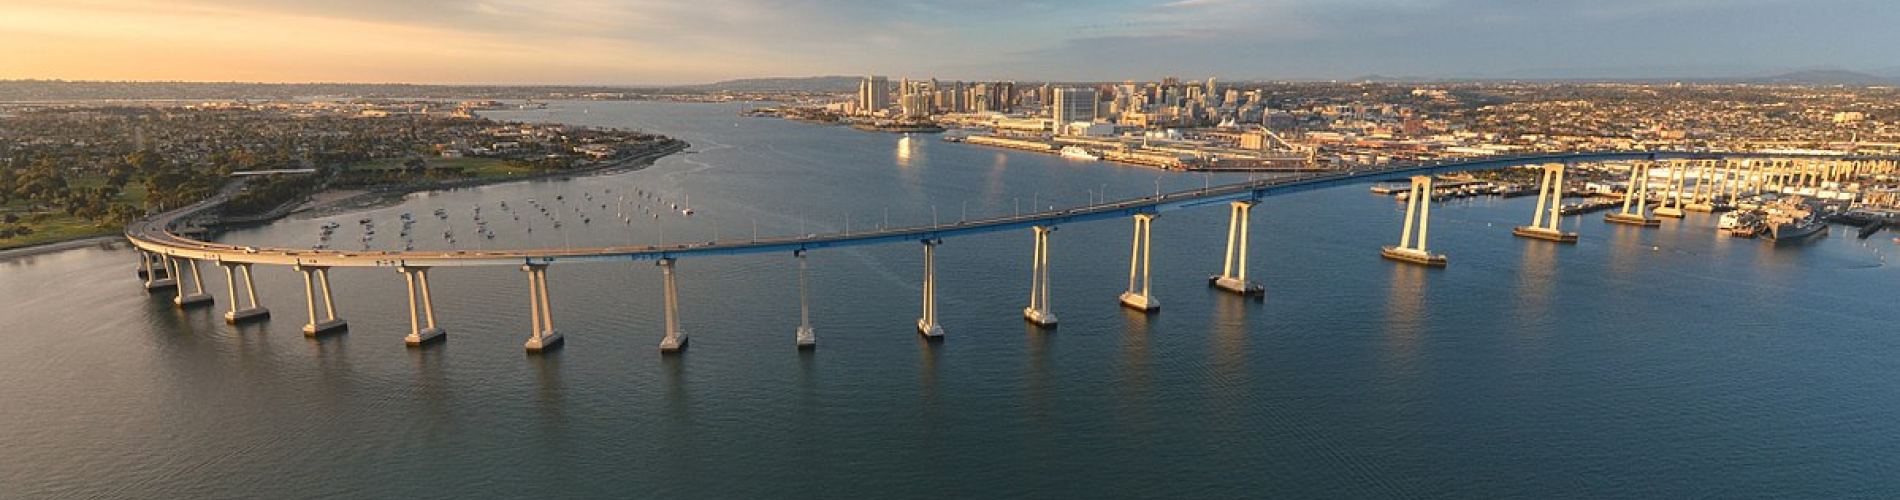 arial view of bridge and San Diego harbor